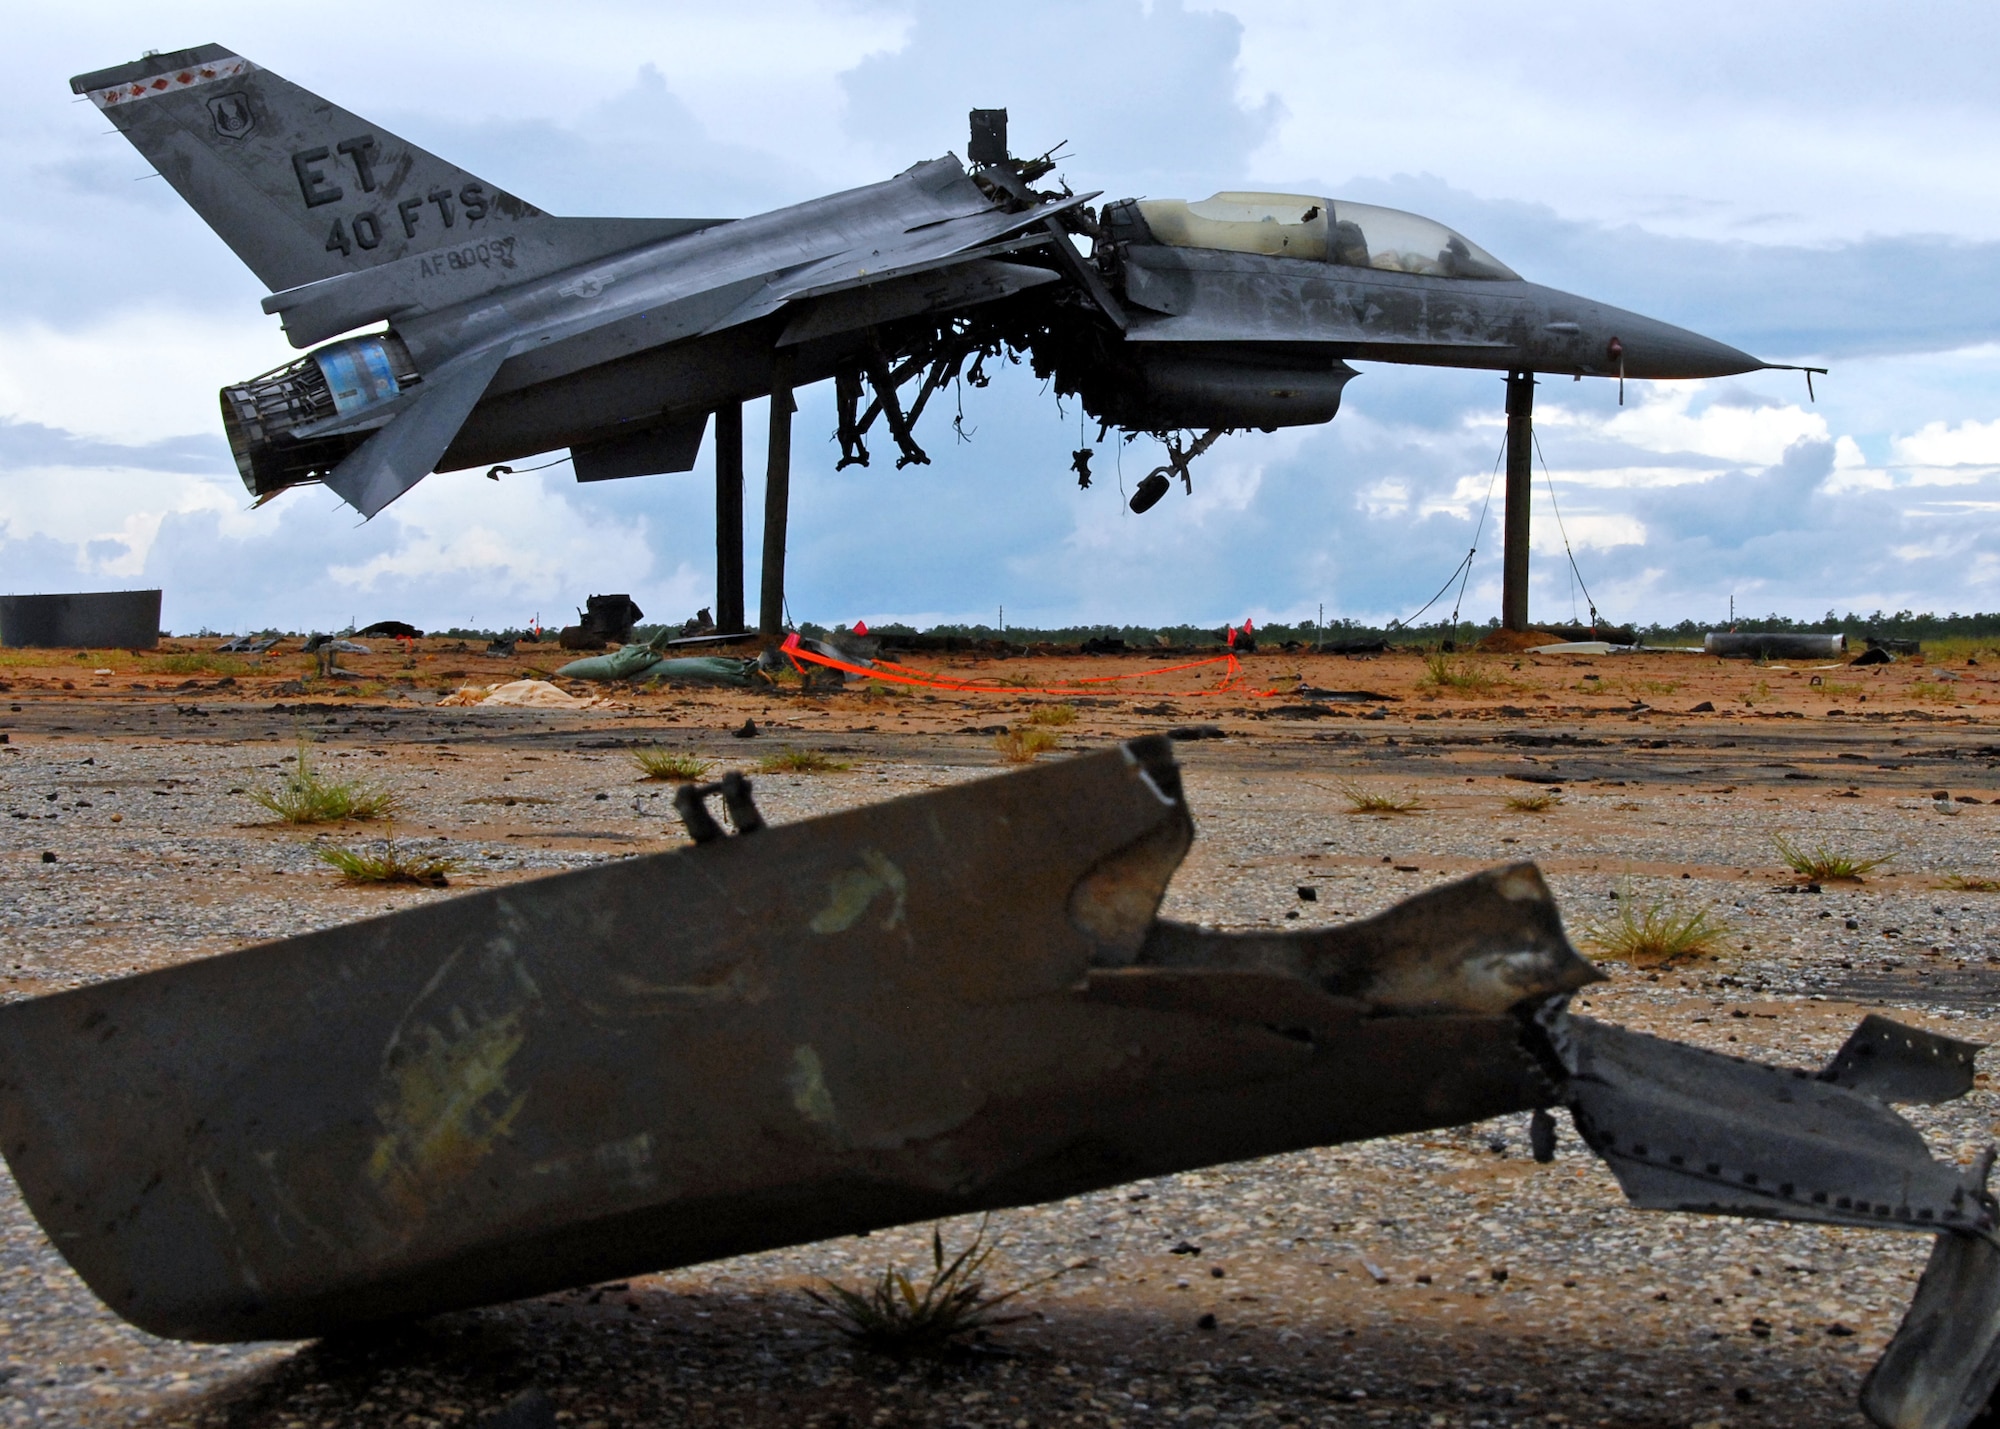 An explosion ripped the F-16 Fighting Falcon into two pieces and scattered debris across the Eglin Air Force Base range Aug. 19.  The explosion was a test of the flight termination system to be used in the QF-16.  The purpose was to demonstrate that the FTS design will be sufficient to immediately terminate the flight of a QF-16, as well as determine a range safety debris footprint.  (U.S. Air Force photo/Samuel King Jr.)